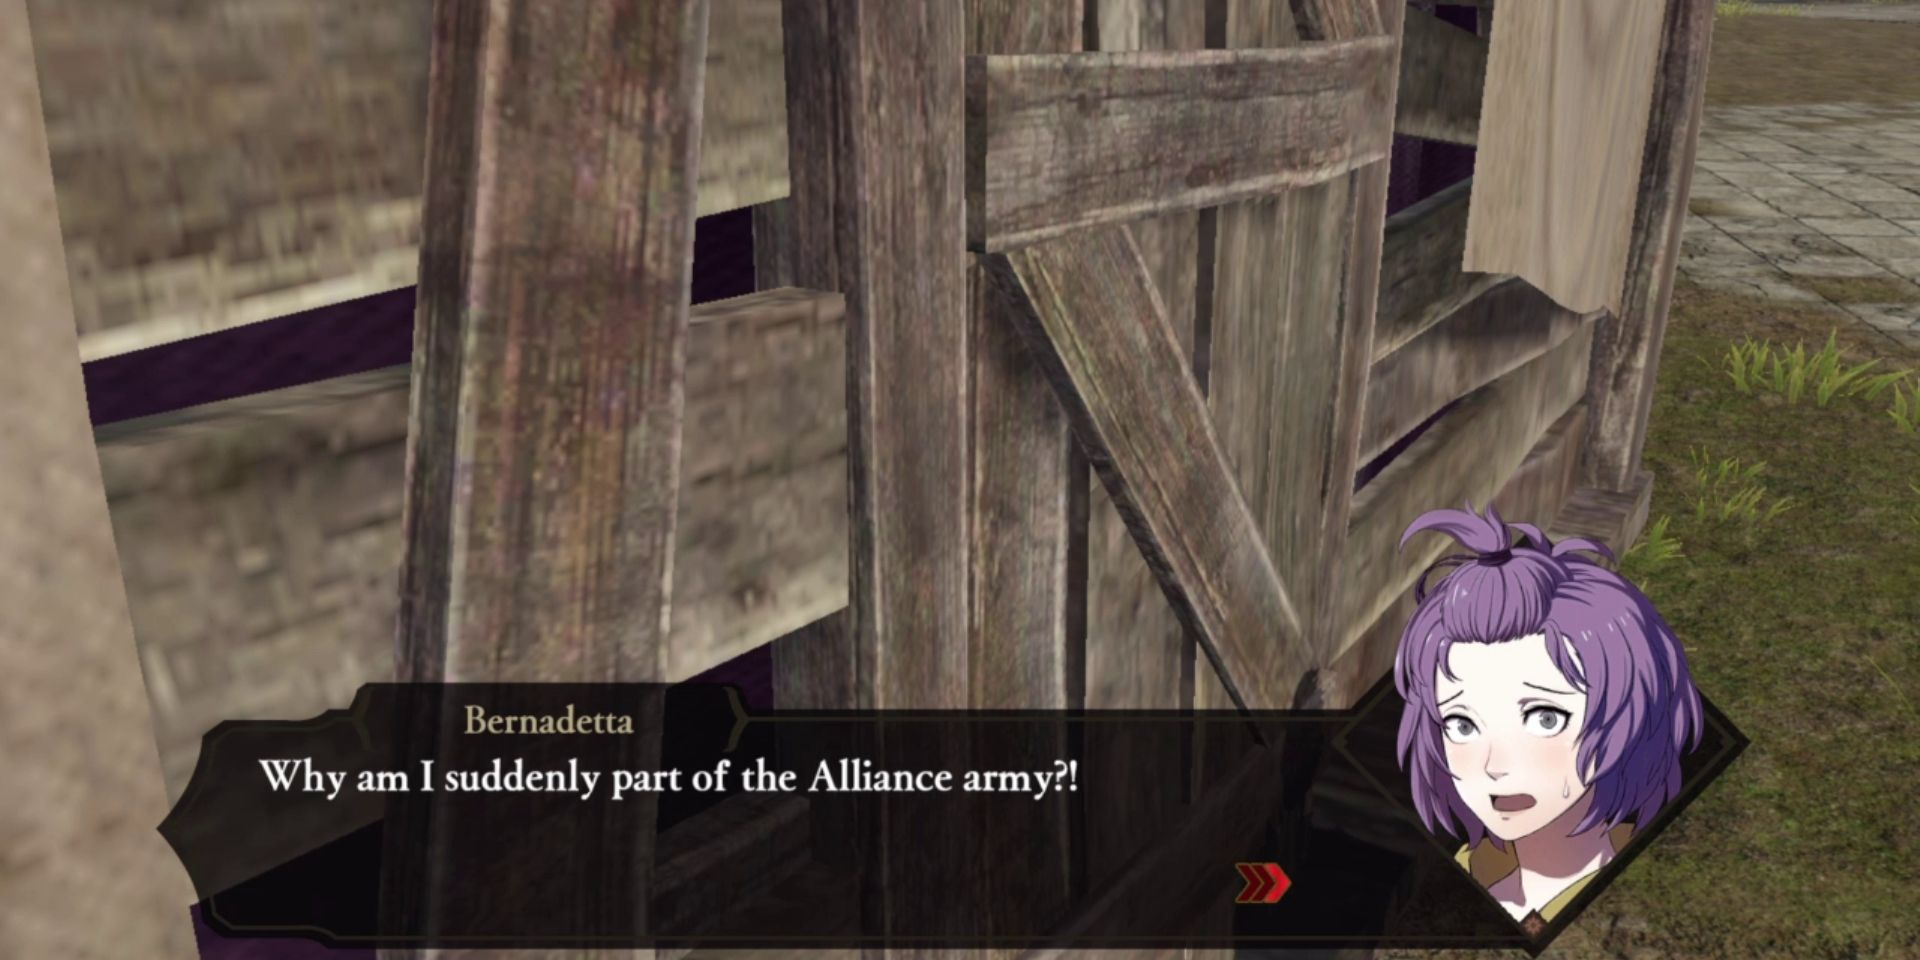 a wooden shack. at the bottom of the screen is an image of a purple haired girl named Bernadetta looking frantic as she says "Why am I suddenly part of the Alliance army?!"